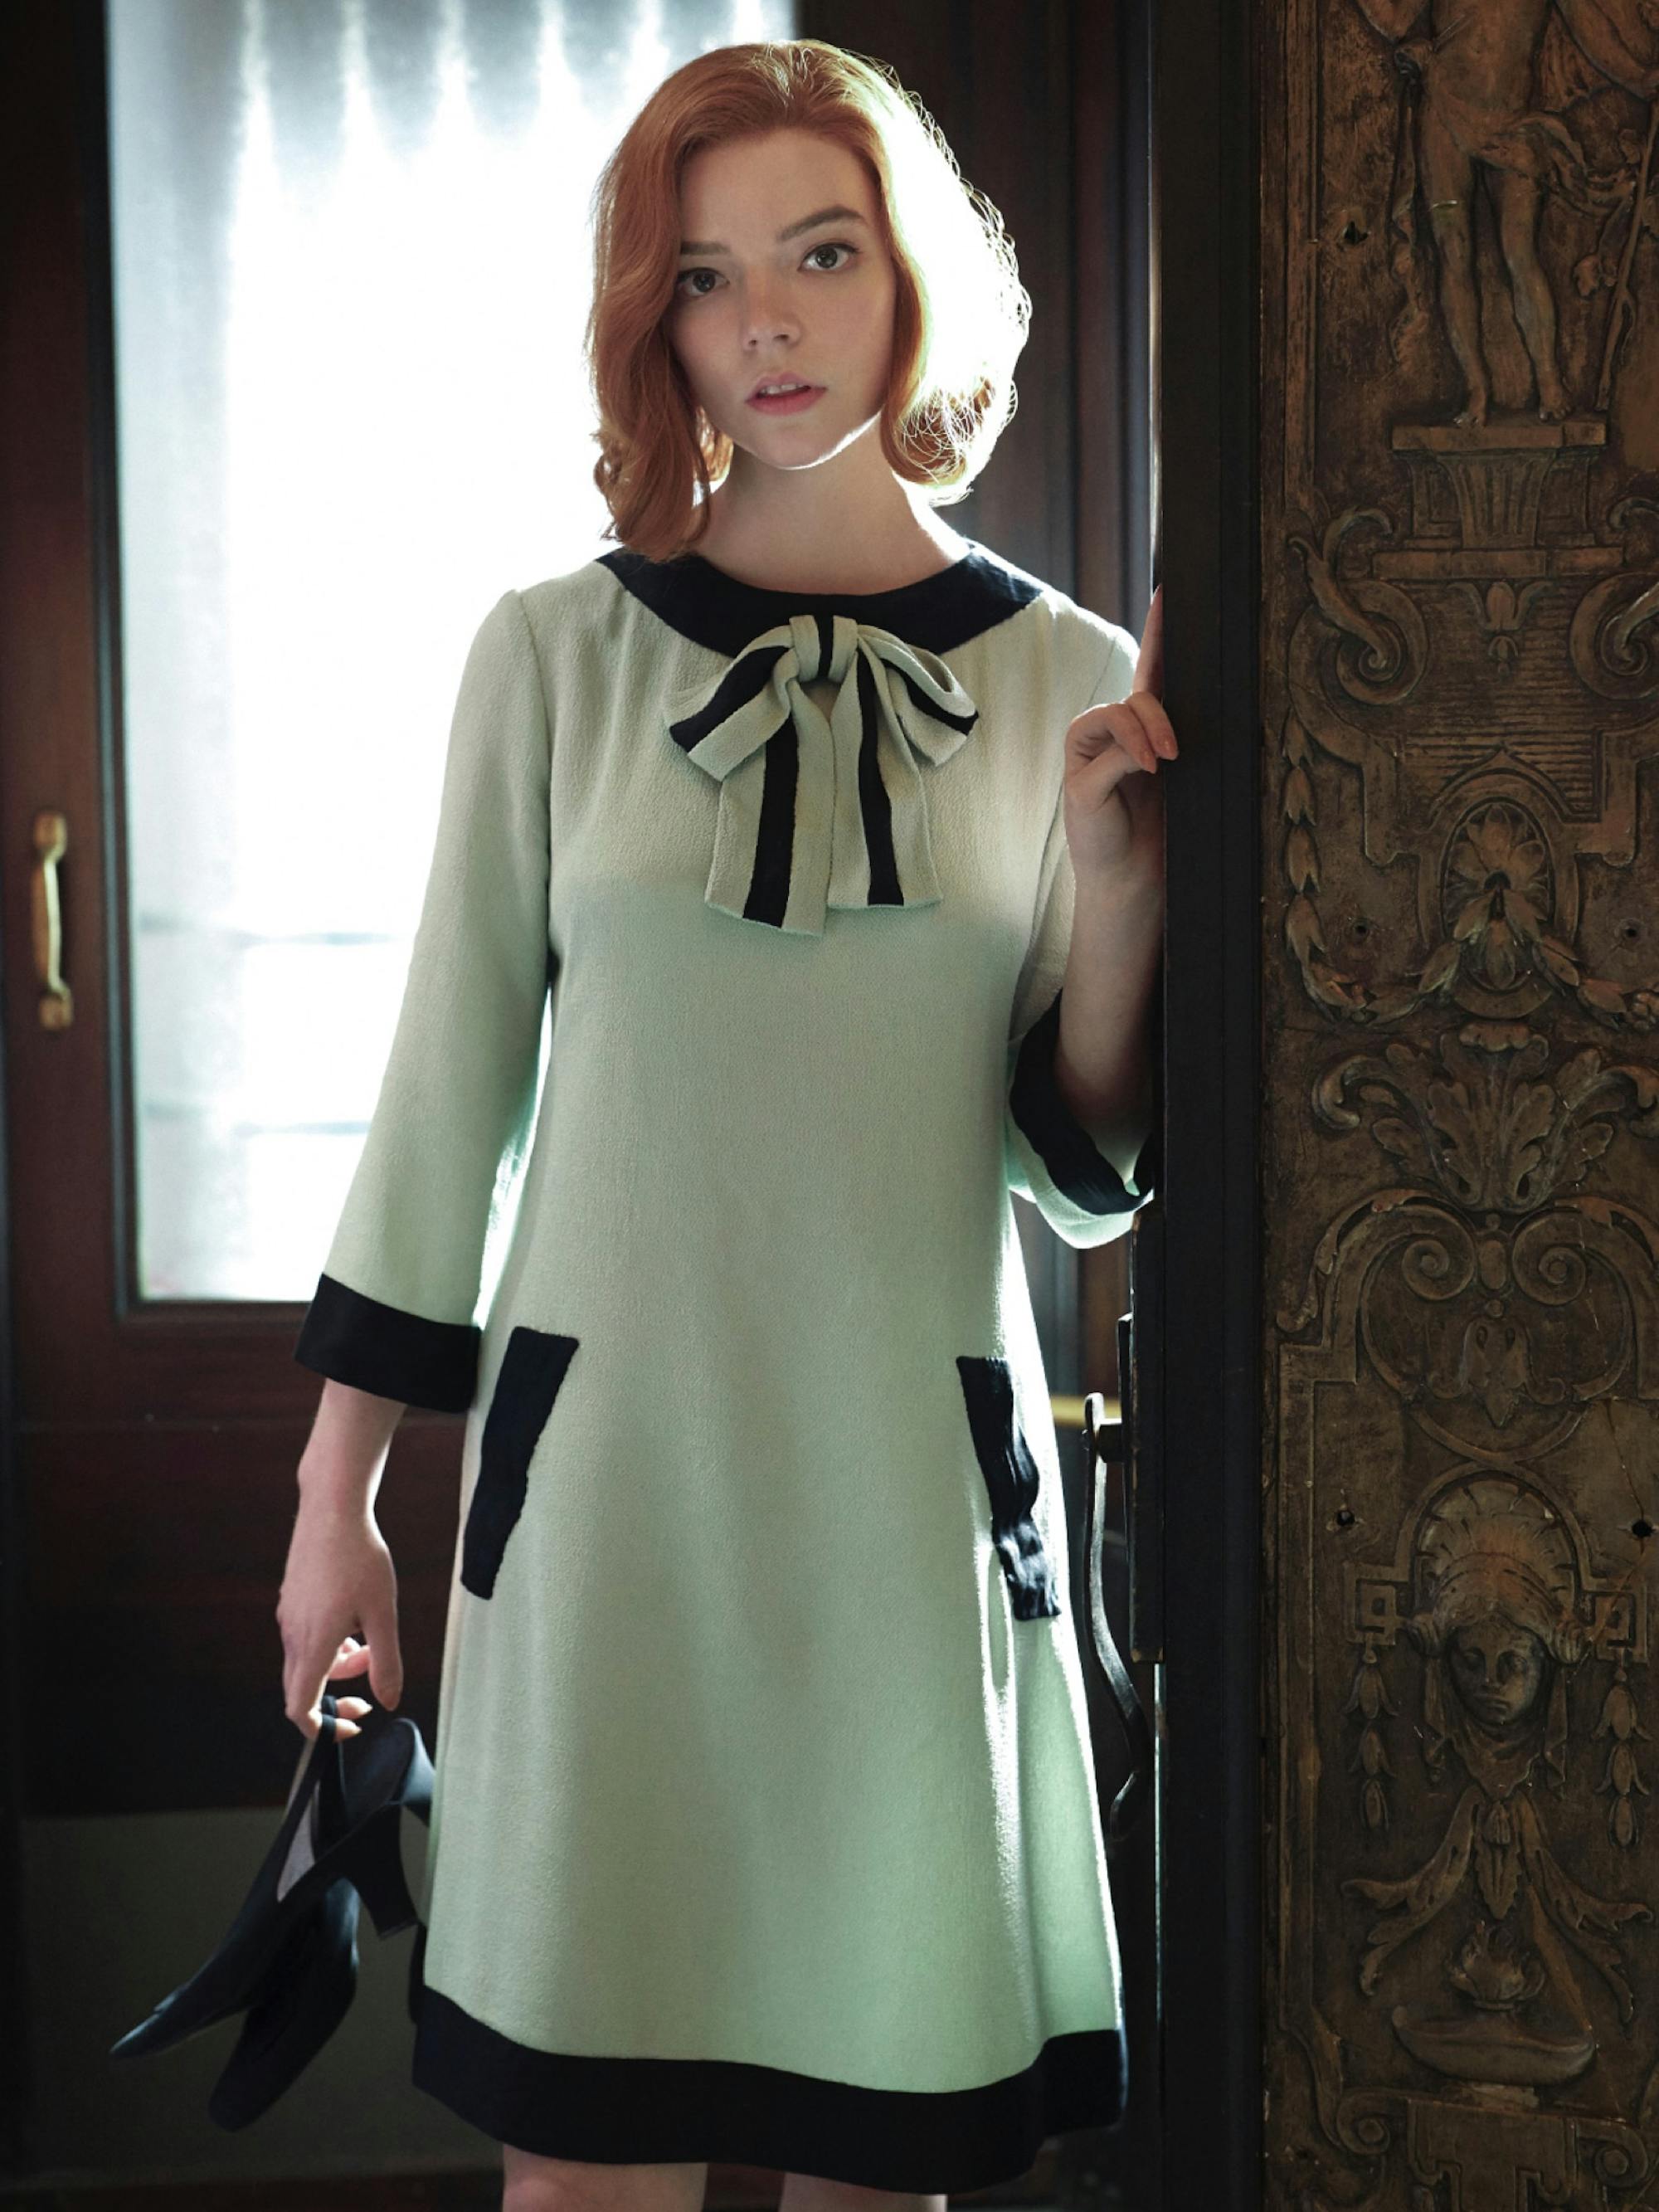 Beth stands in a doorway, heels in hand, wearing her iconic bow dress.